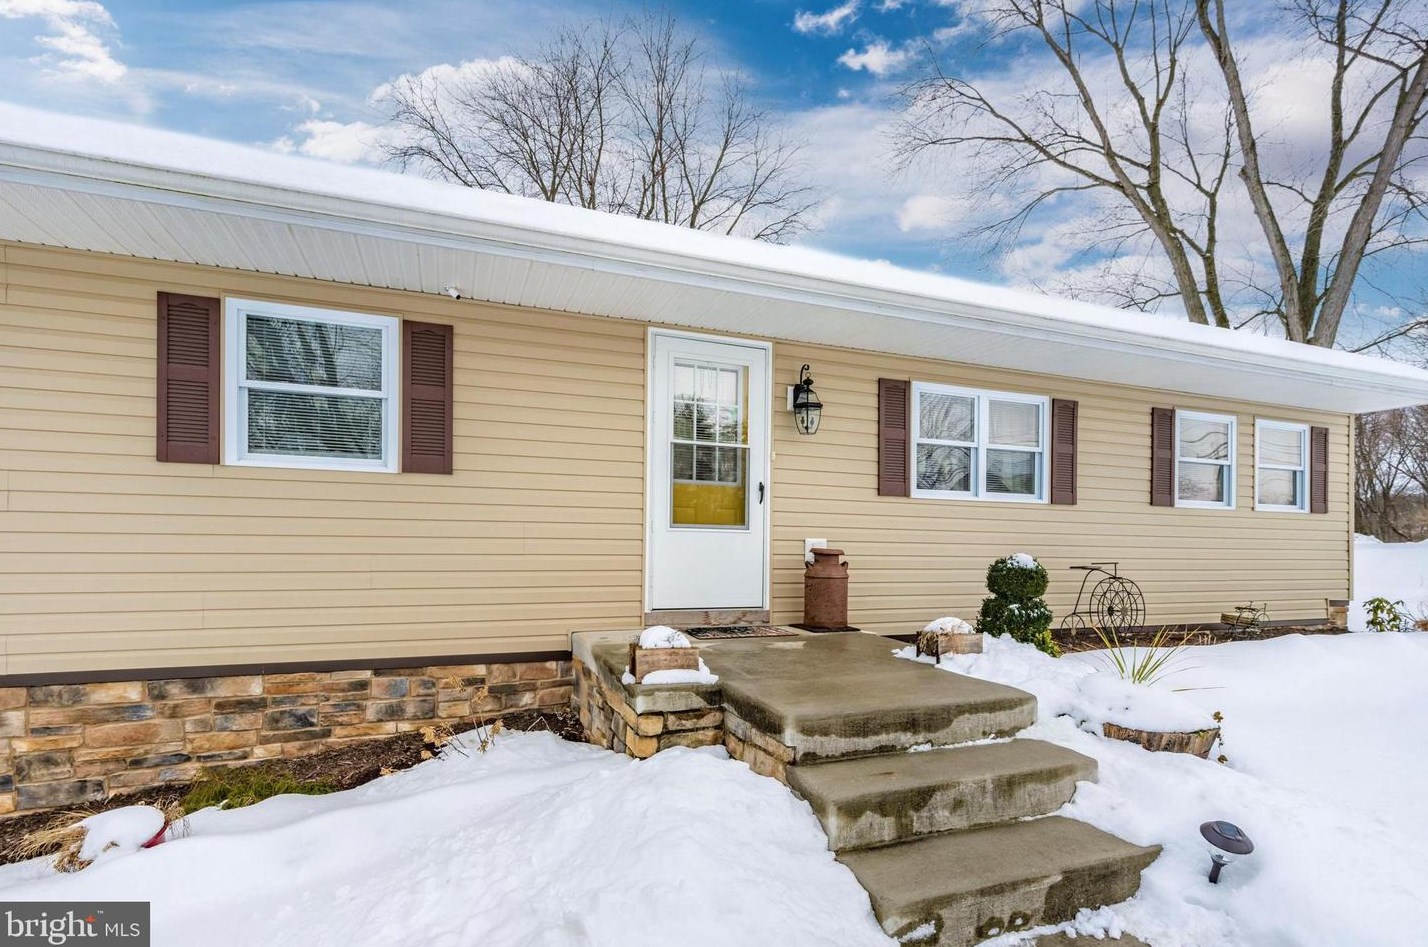 14409 National Pike, Clear Spring, MD 21722